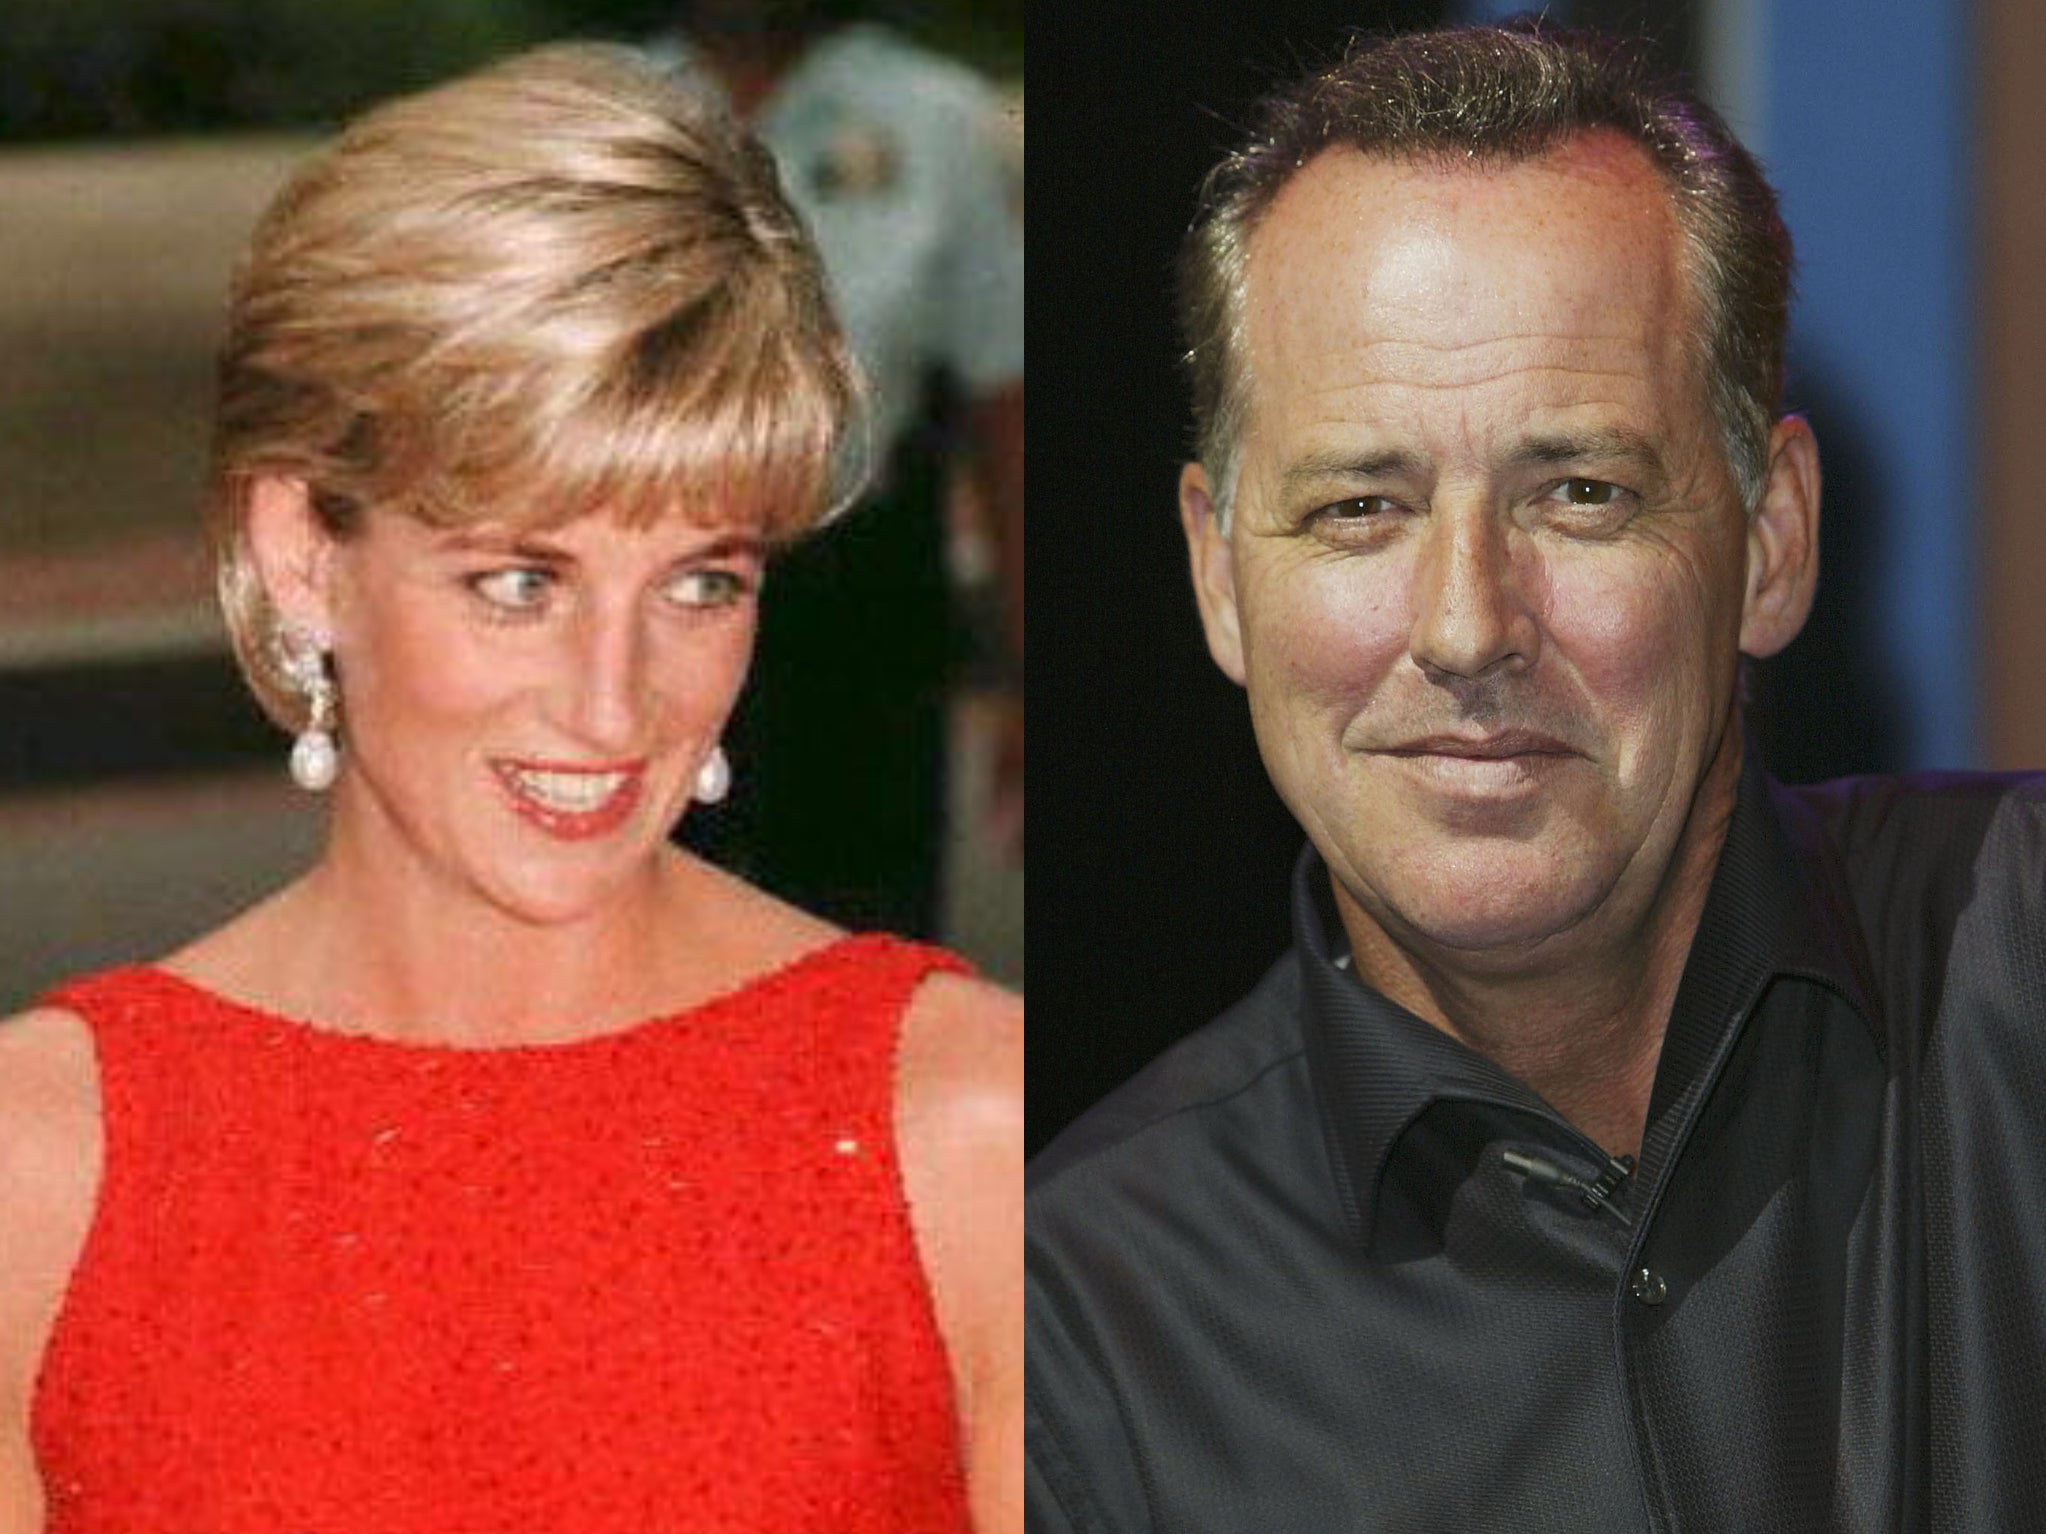 Princess Diana and Michael Barrymore met ‘secretly’ in 1997, letters read out in court on Monday suggest